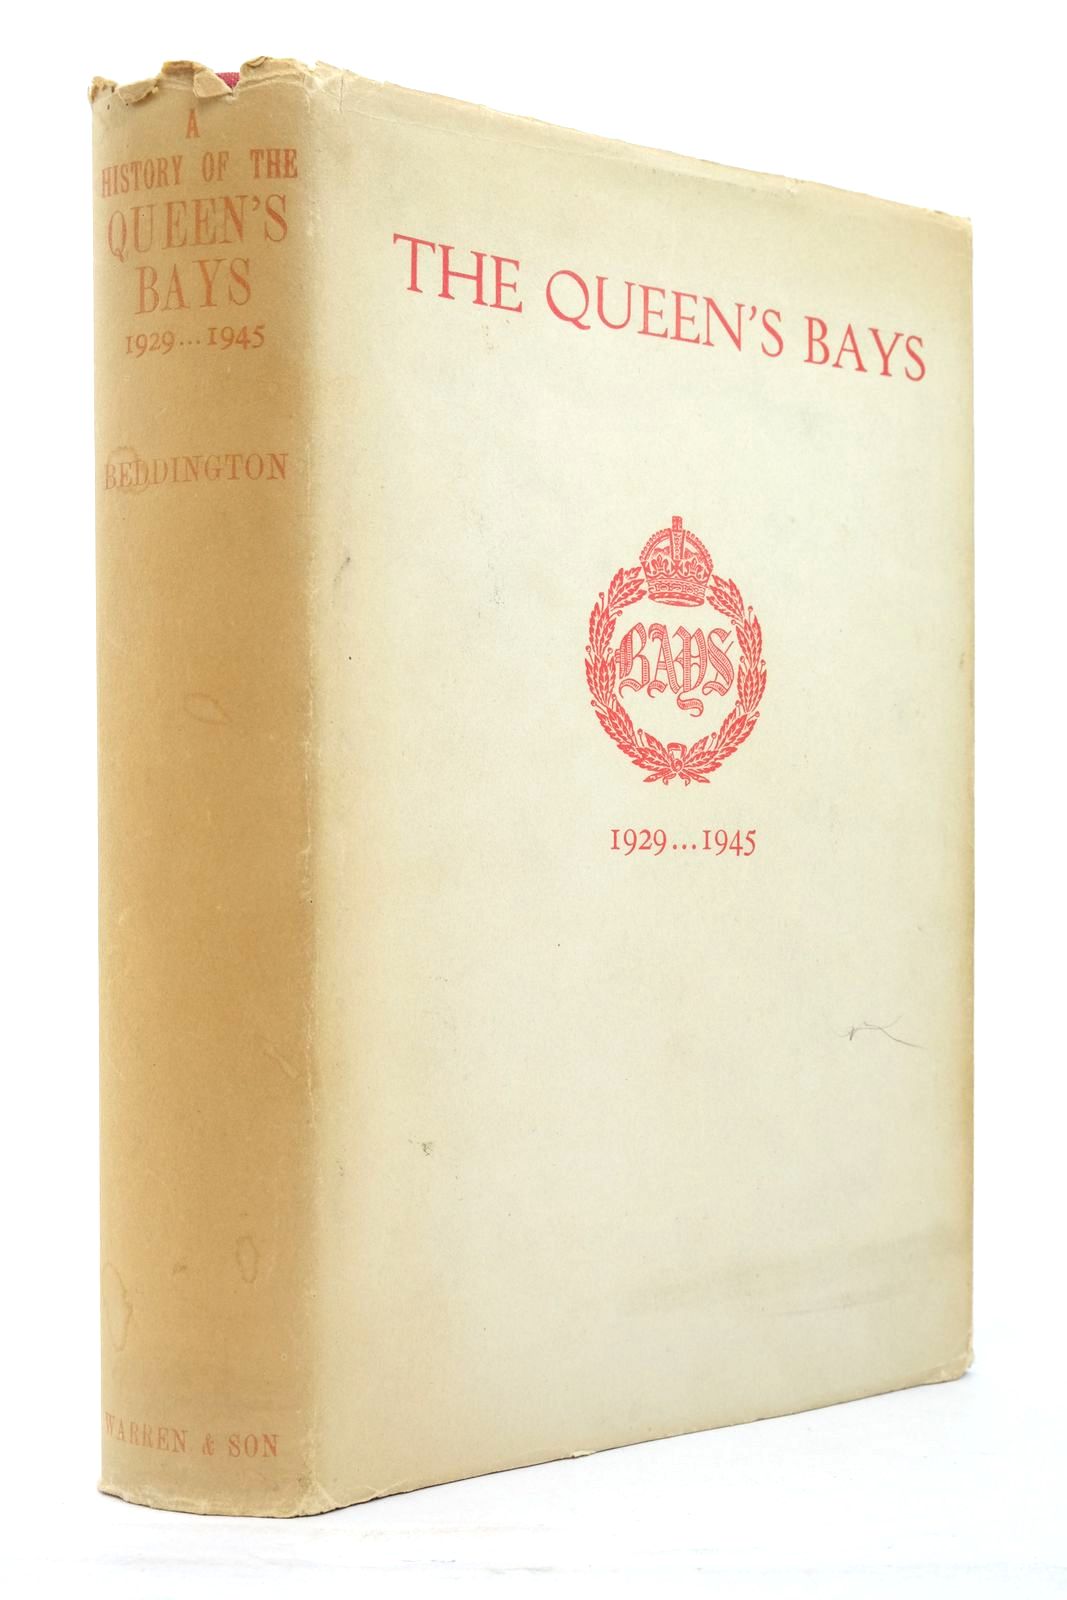 Photo of A HISTORY OF THE QUEEN'S BAYS (THE 2ND DRAGOON GUARDS) 1929...1945 written by Beddington, W.R. McCreery, R.L. published by Warren and Son Ltd. (STOCK CODE: 2137732)  for sale by Stella & Rose's Books